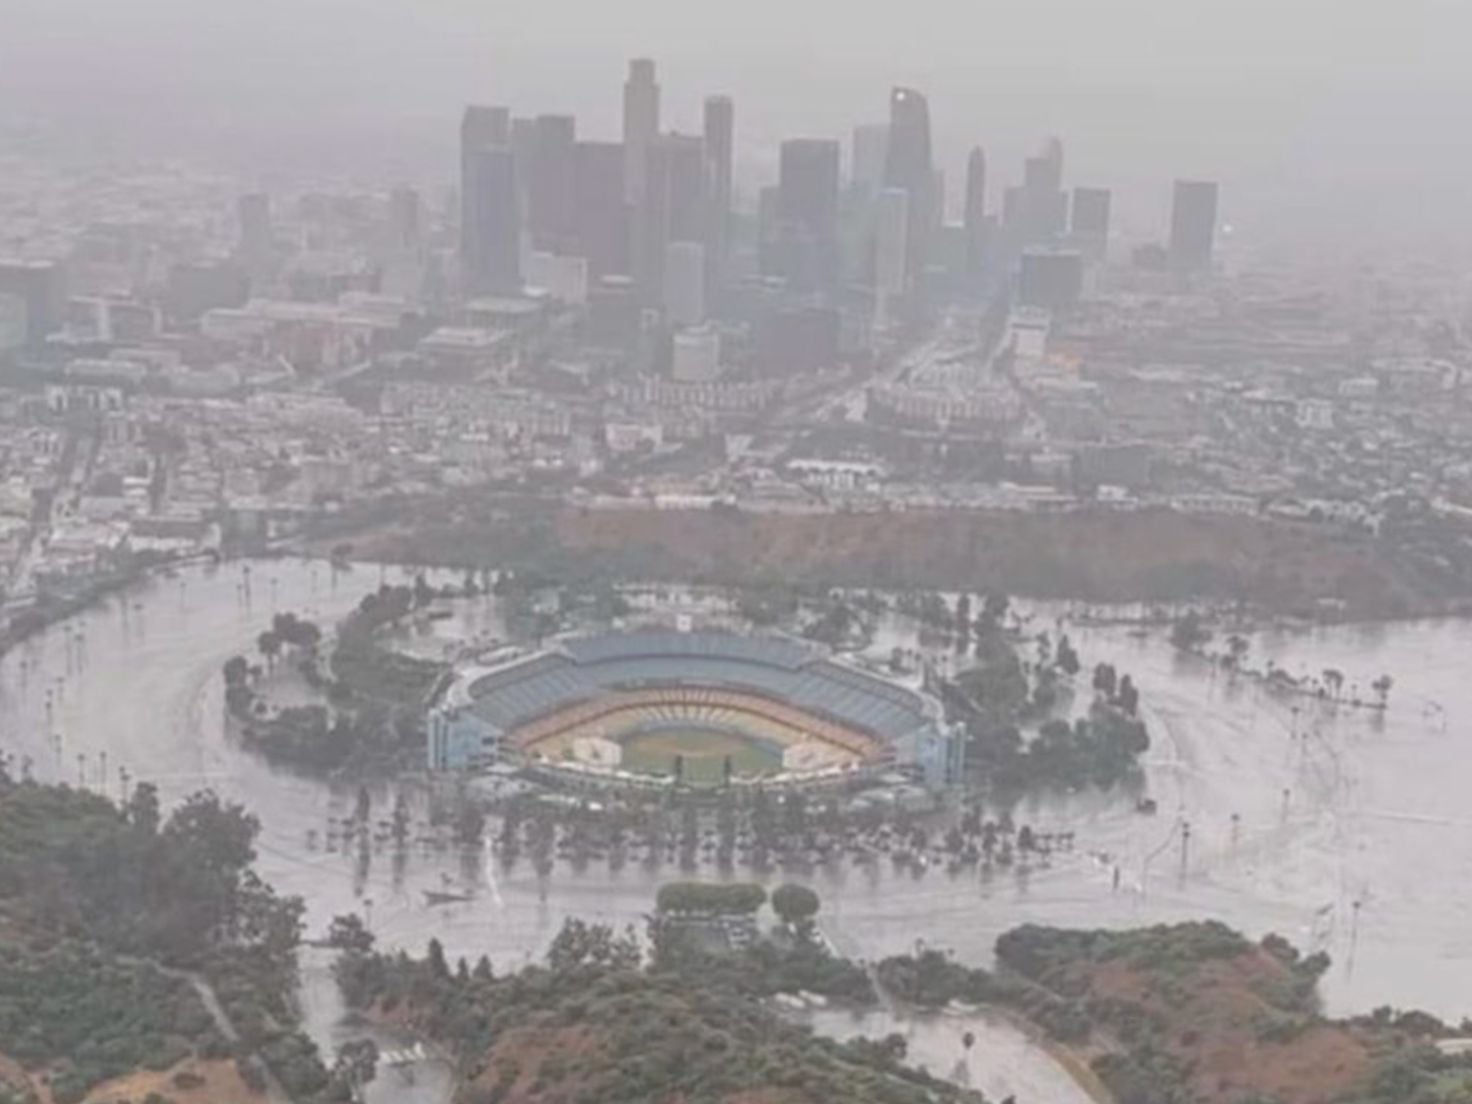 Images of flooded Dodgers Stadium stun LA fans - AS USA